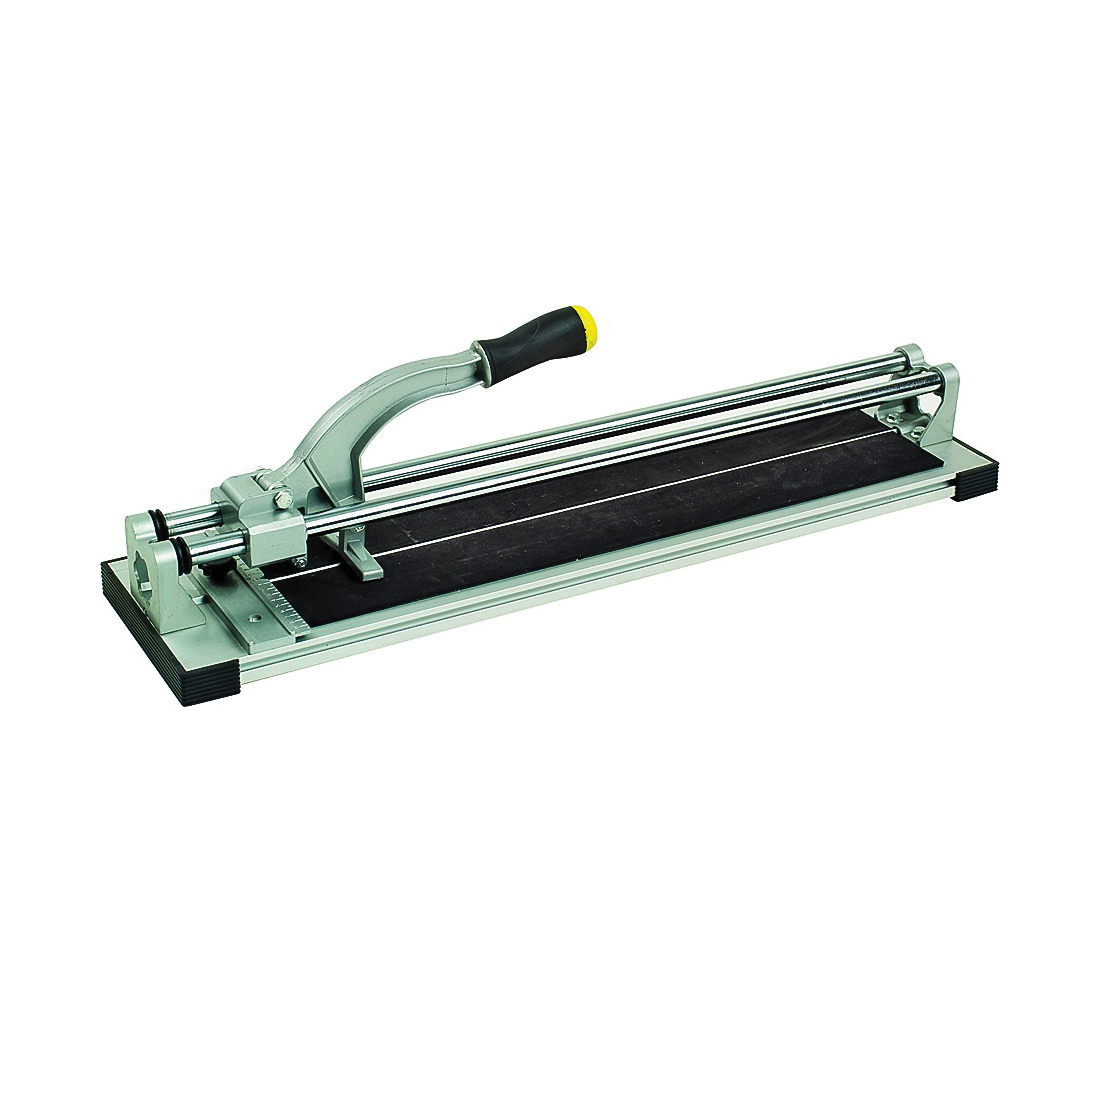 49047 Cutter, 20 in Cutting Capacity, Cut Material: Steel, Black/Yellow